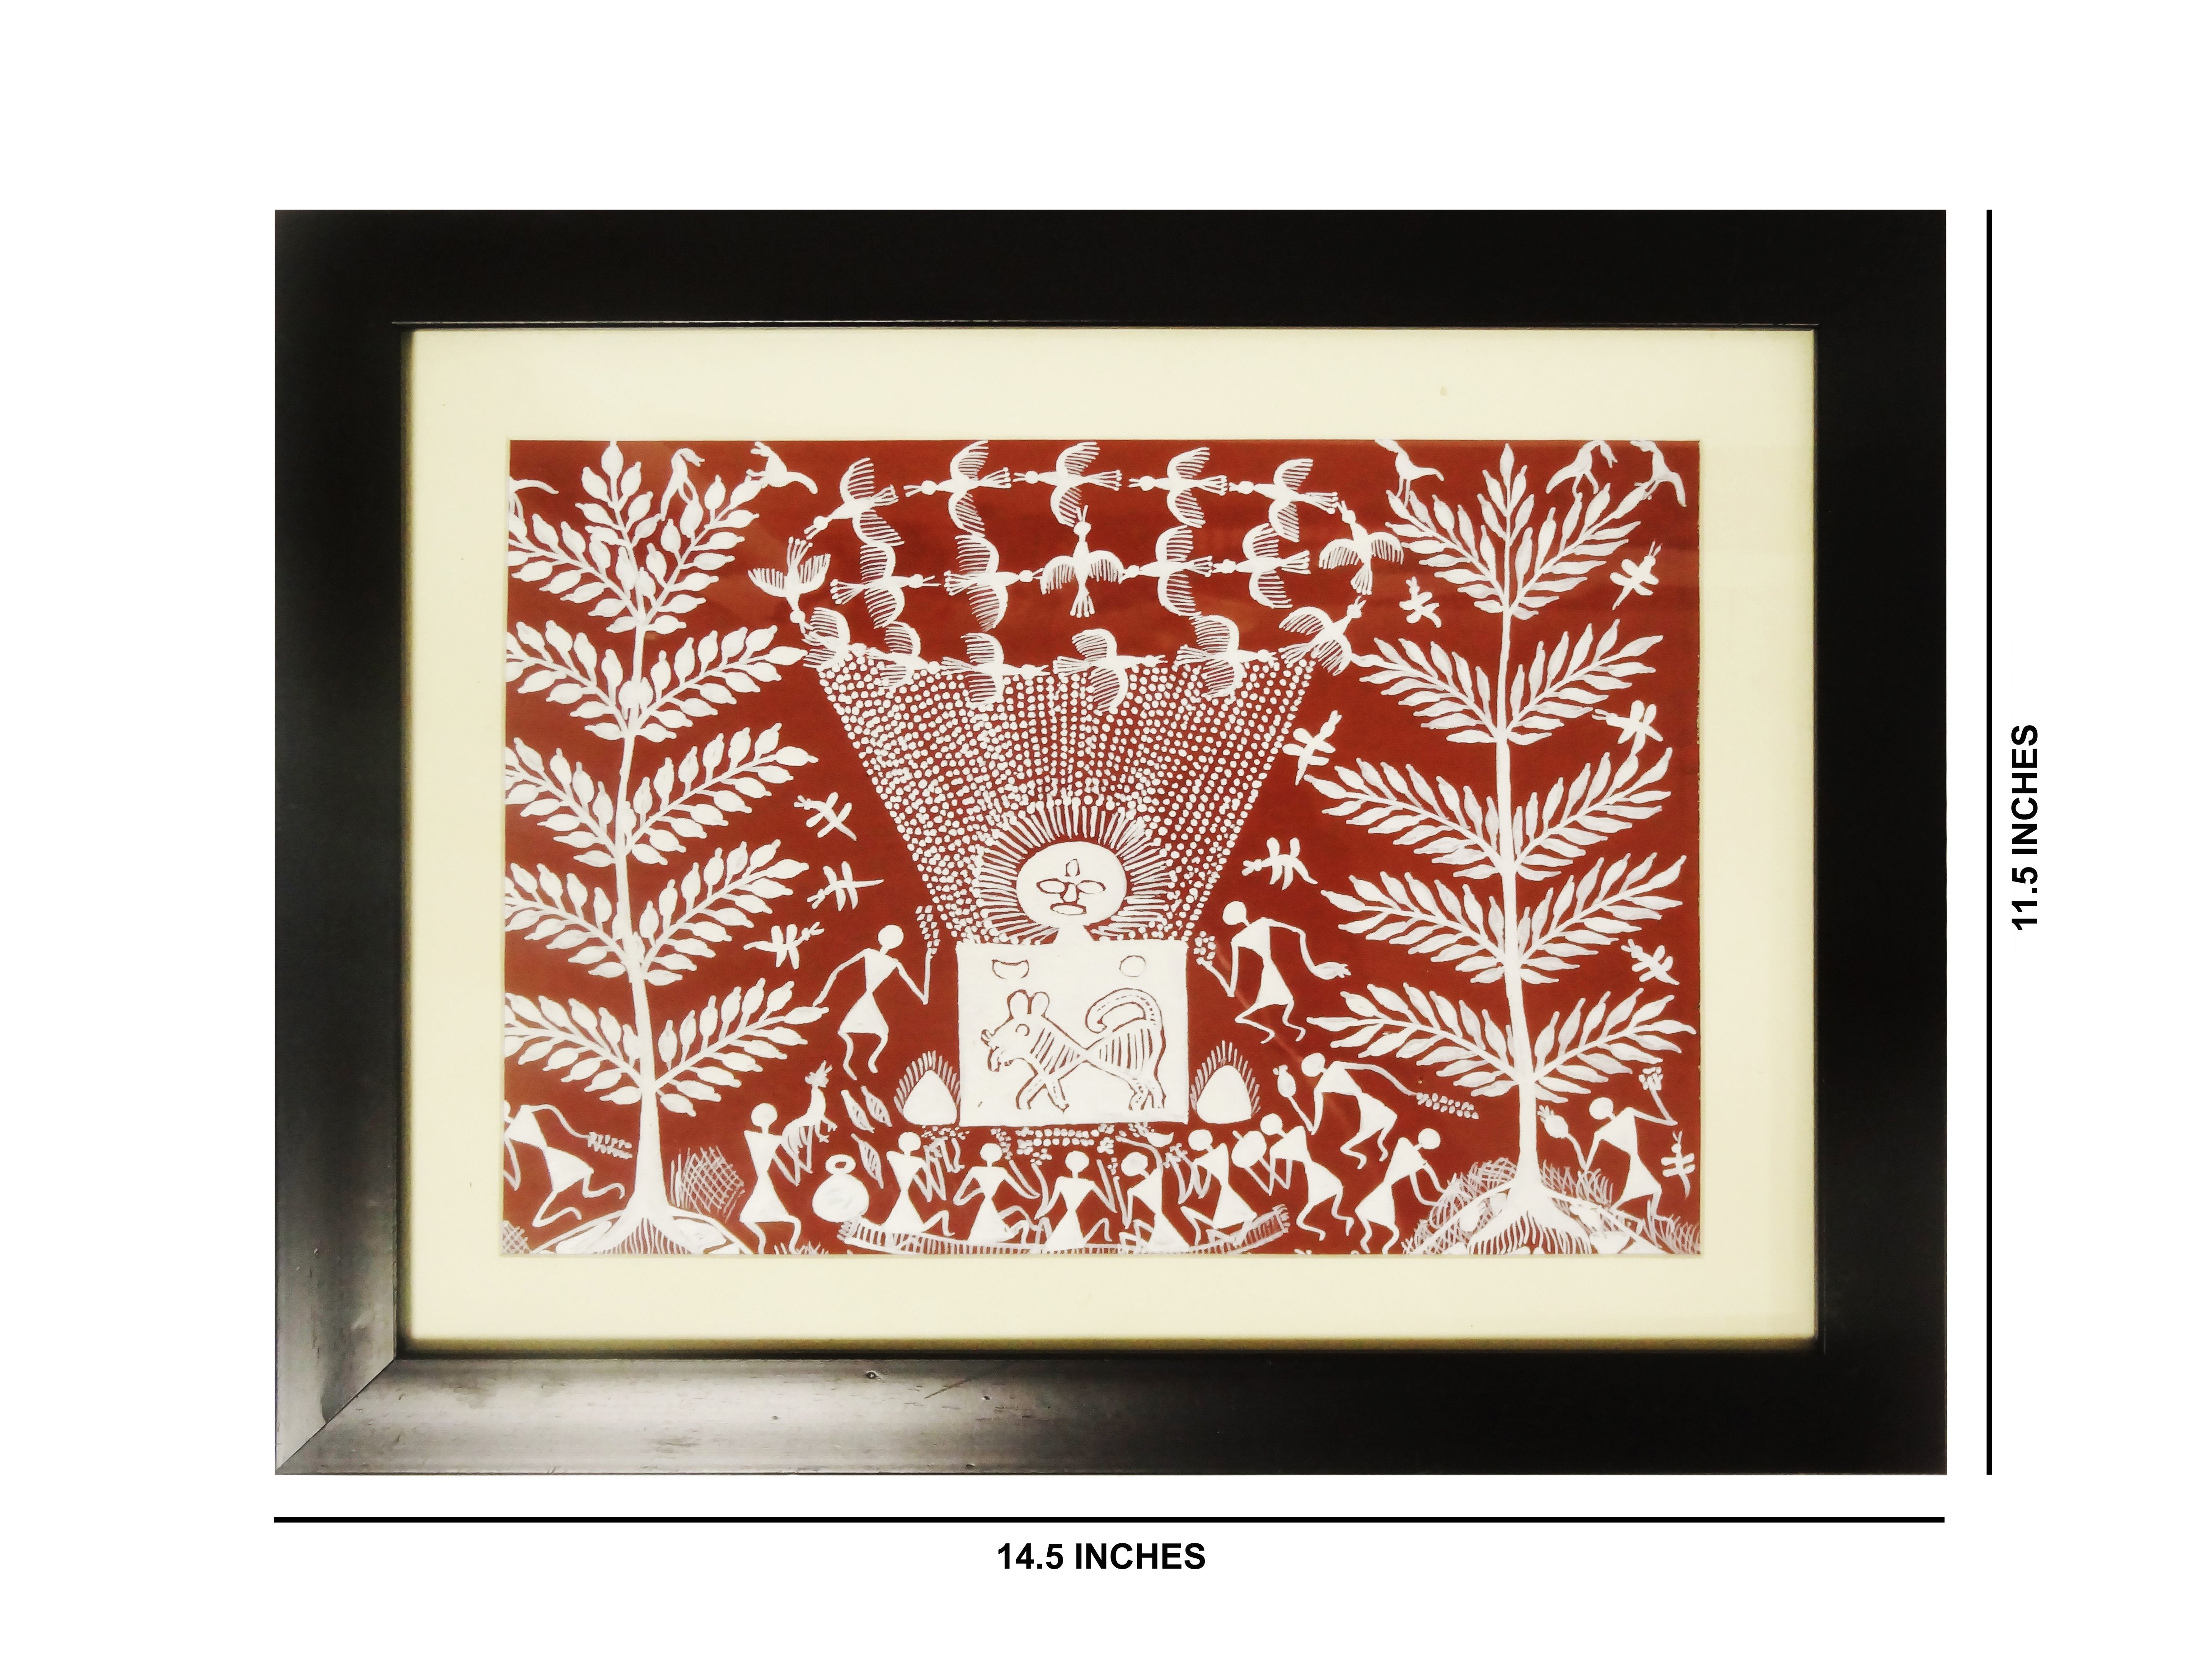 Warli Hand Painting Wall Hanging Harvest Festival with Fiber Frame 14.5"x11.5"